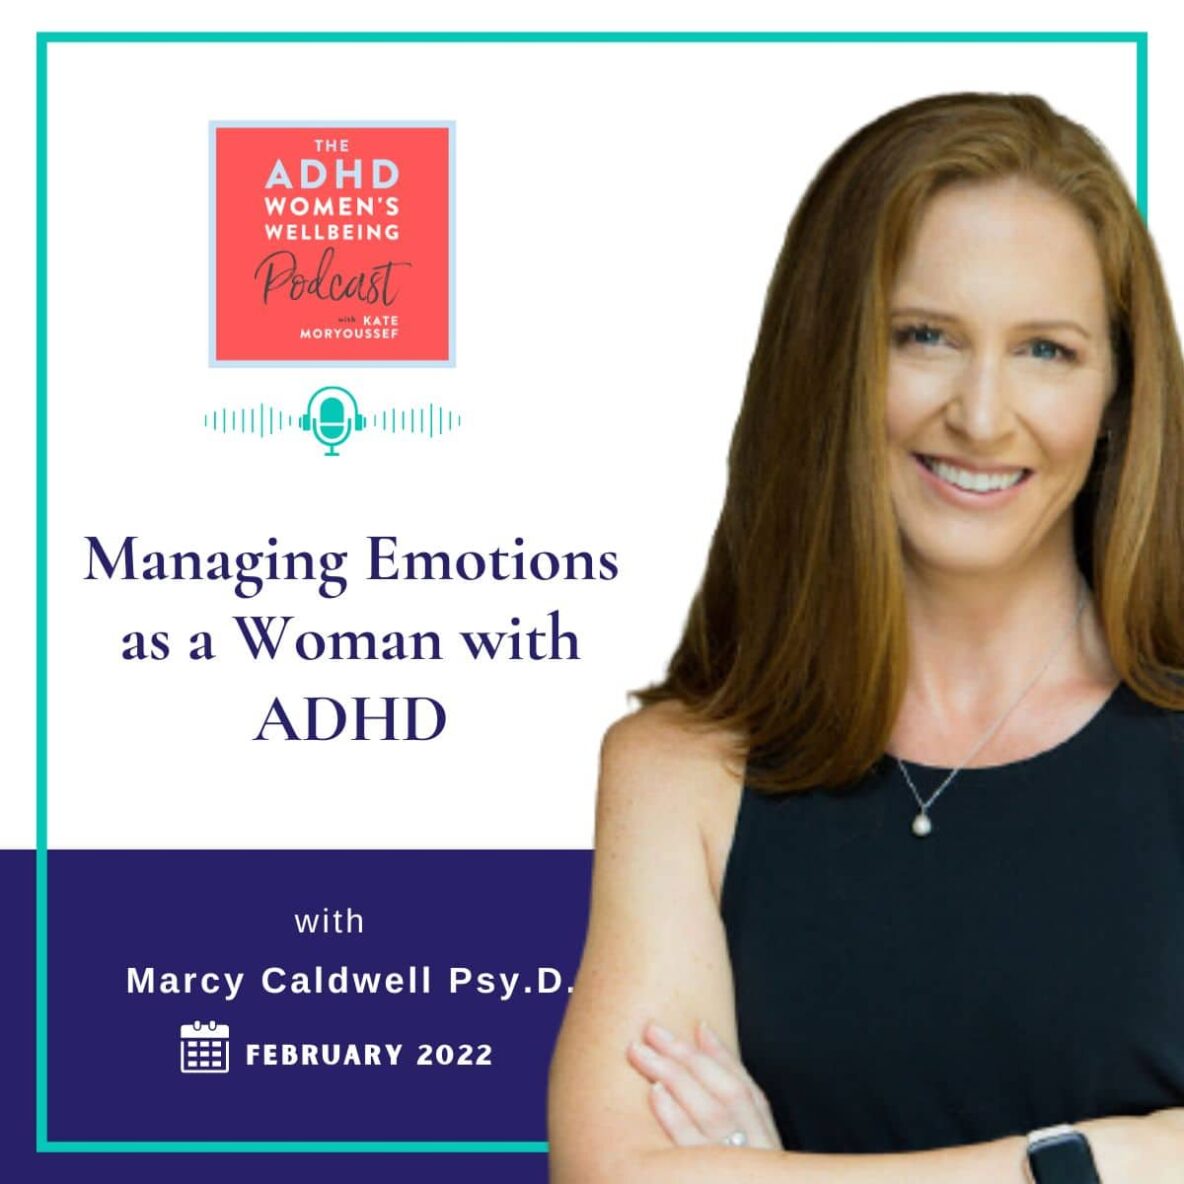 Managing Emotions as a Woman with ADHD